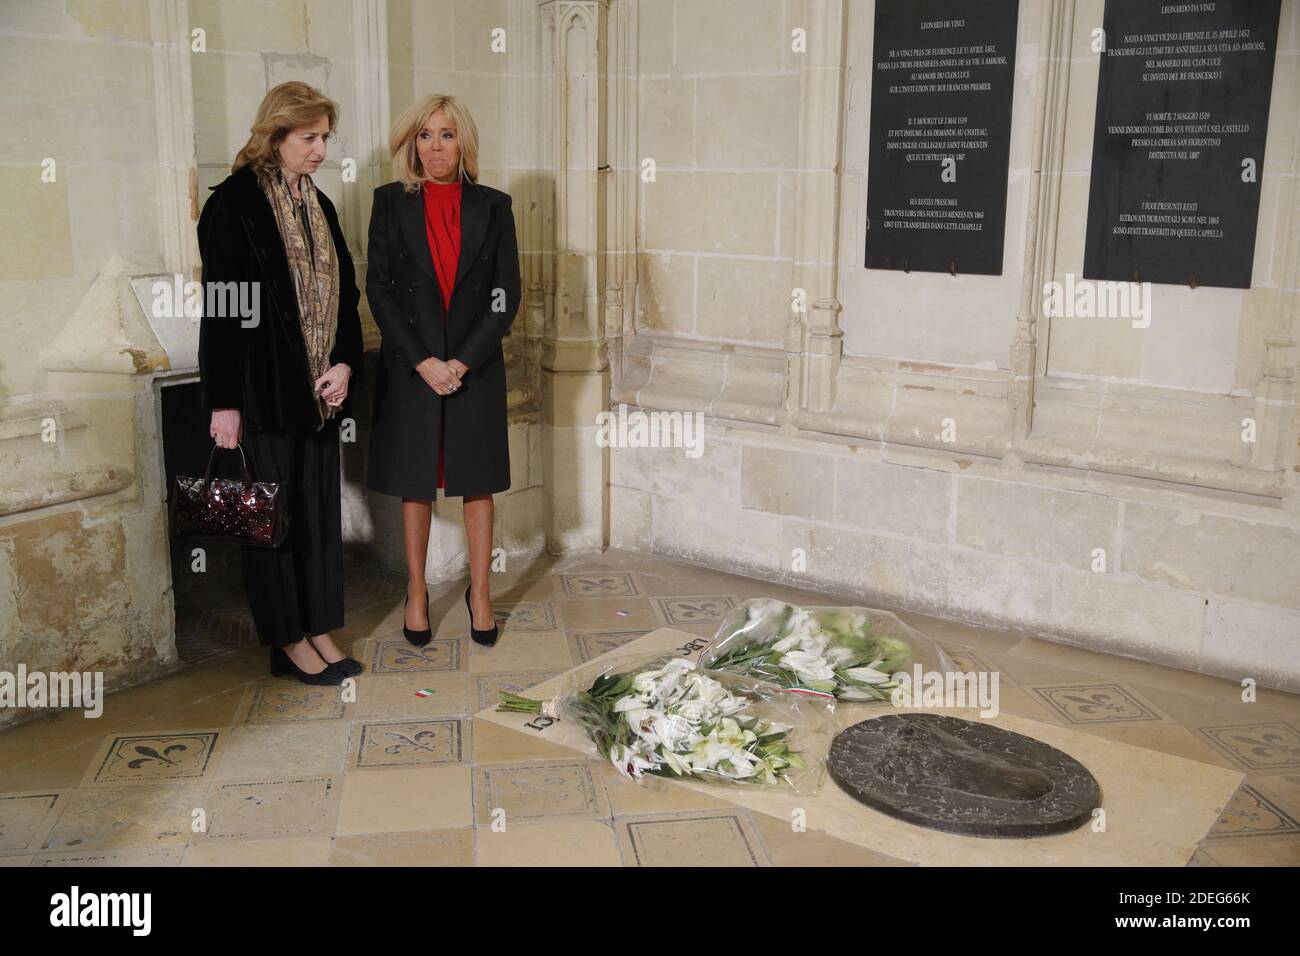 Brigitte Macron, wife of French President Emmanuel Macron, and Laura Mattarella, daughter of Italian President Sergio Mattarella pay their respects at the tomb of Italian renaissance painter and scientist Leonardo da Vinci to commemorate the 500th anniversary of his death, at the Saint-Hubert Chapel during a visit at the Chateau d'Amboise, France, May 2, 2019. Photo by Philippe Wojazer/pool/ABACAPRESS.COM Stock Photo